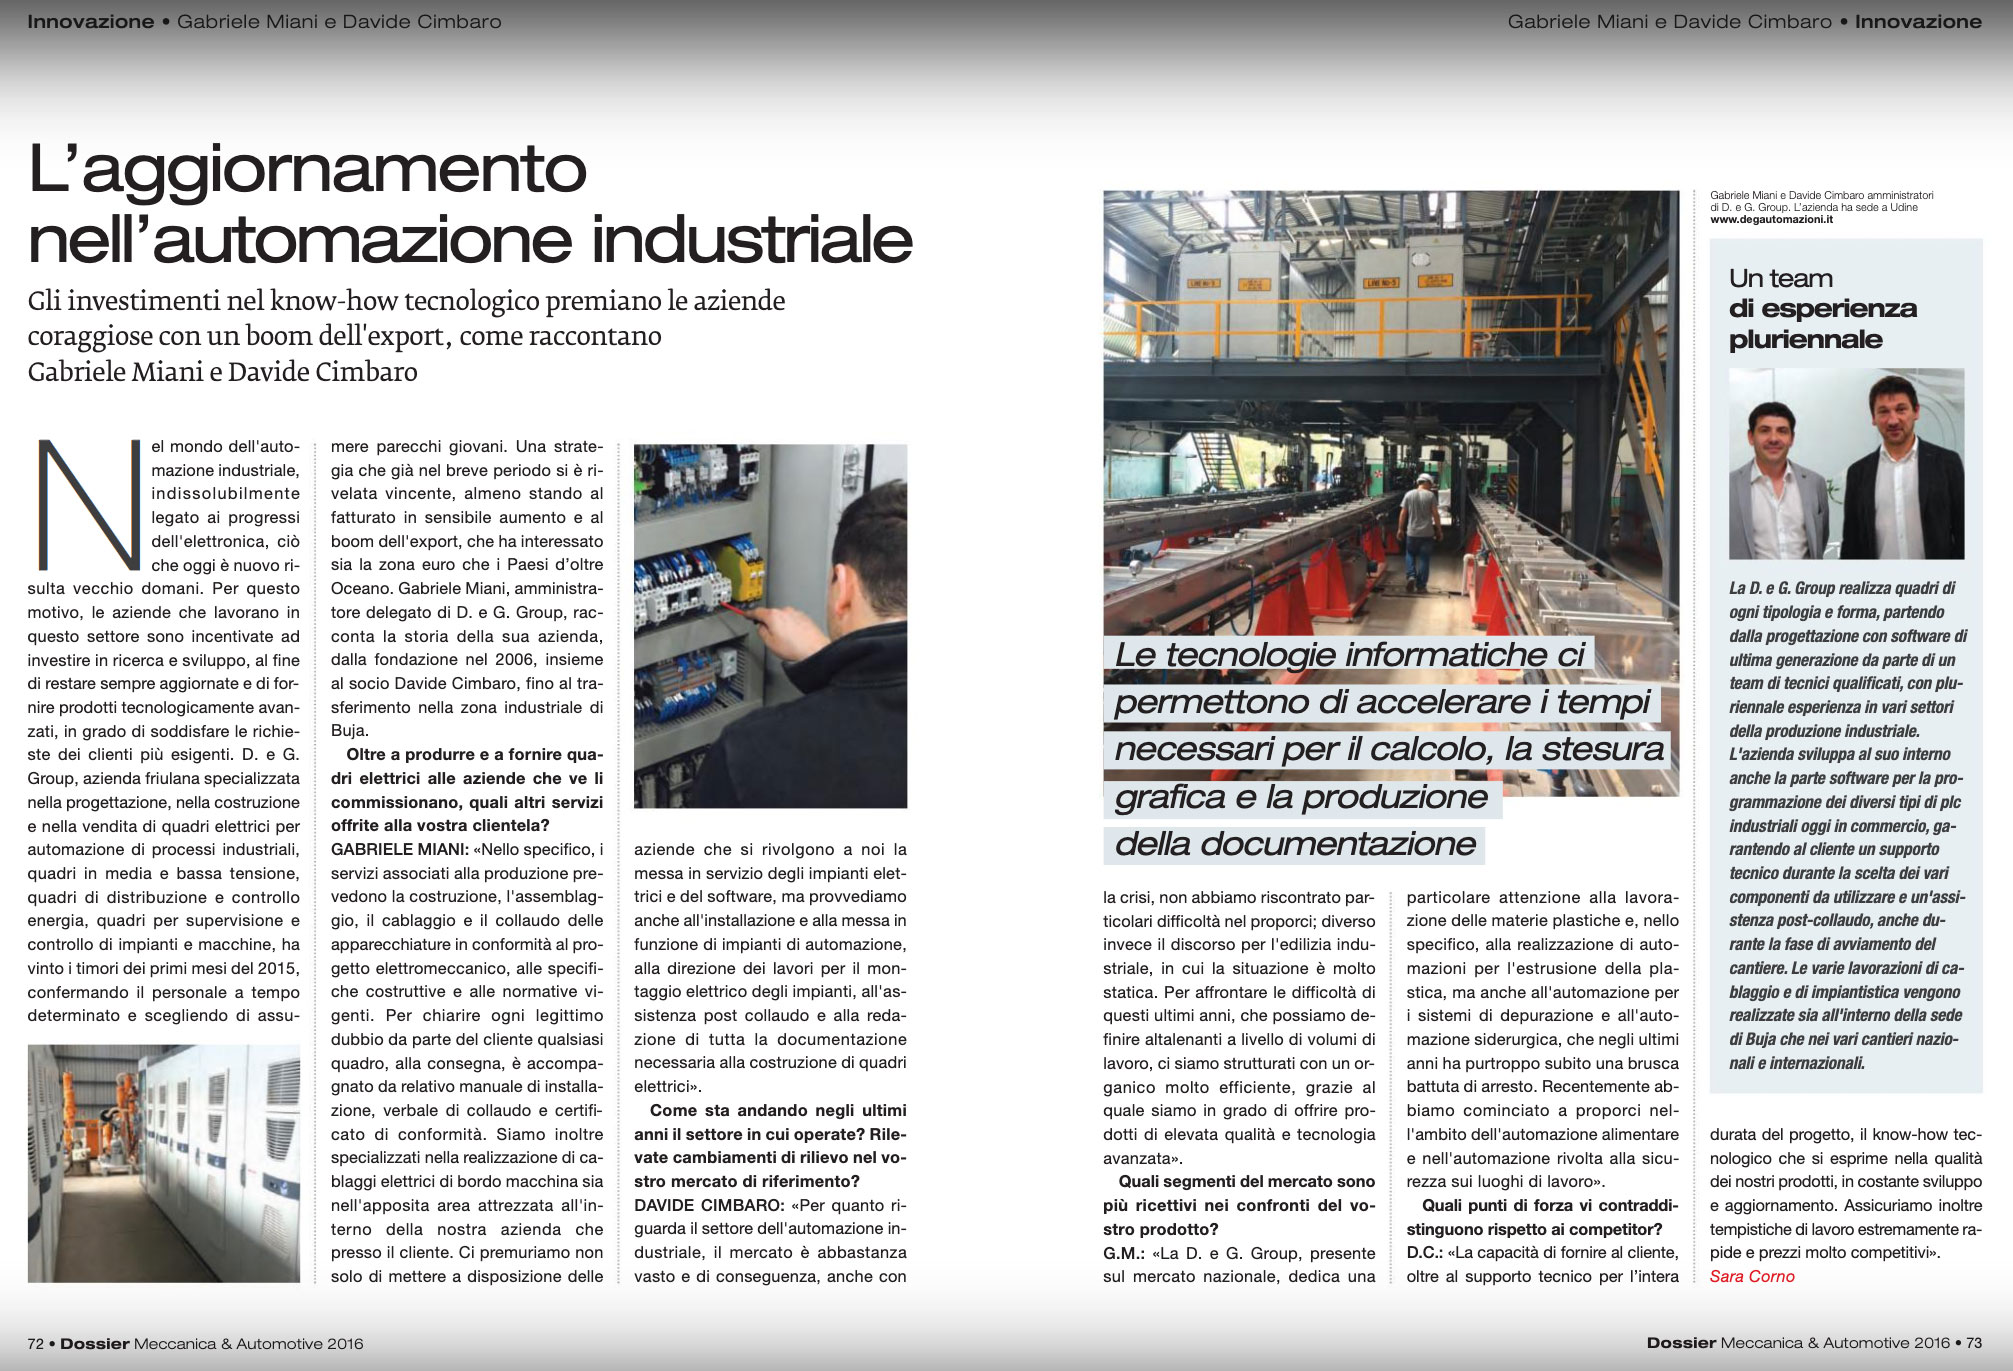 INTERVIEW WITH “IL GIORNALE”, ON THE MECHANICAL AND AUTOMOTIVE DOSSIER PUBLISHED IN MAY 2016 (page 72)